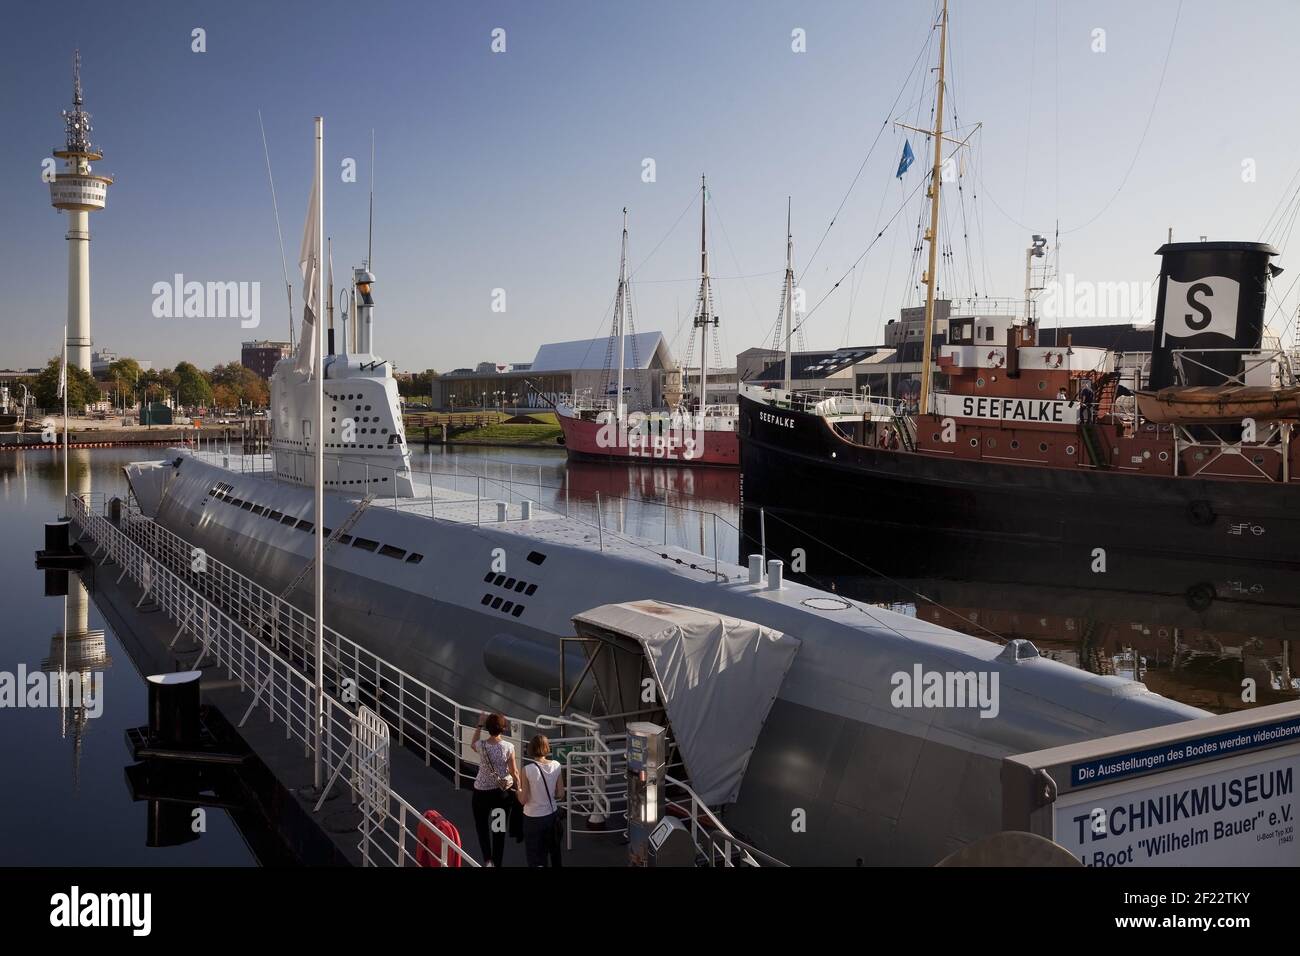 Museum harbor with the Wilhelm Bauer submarine, German Maritime Museum,  Bremerhaven, Germany, Europe Stock Photo - Alamy